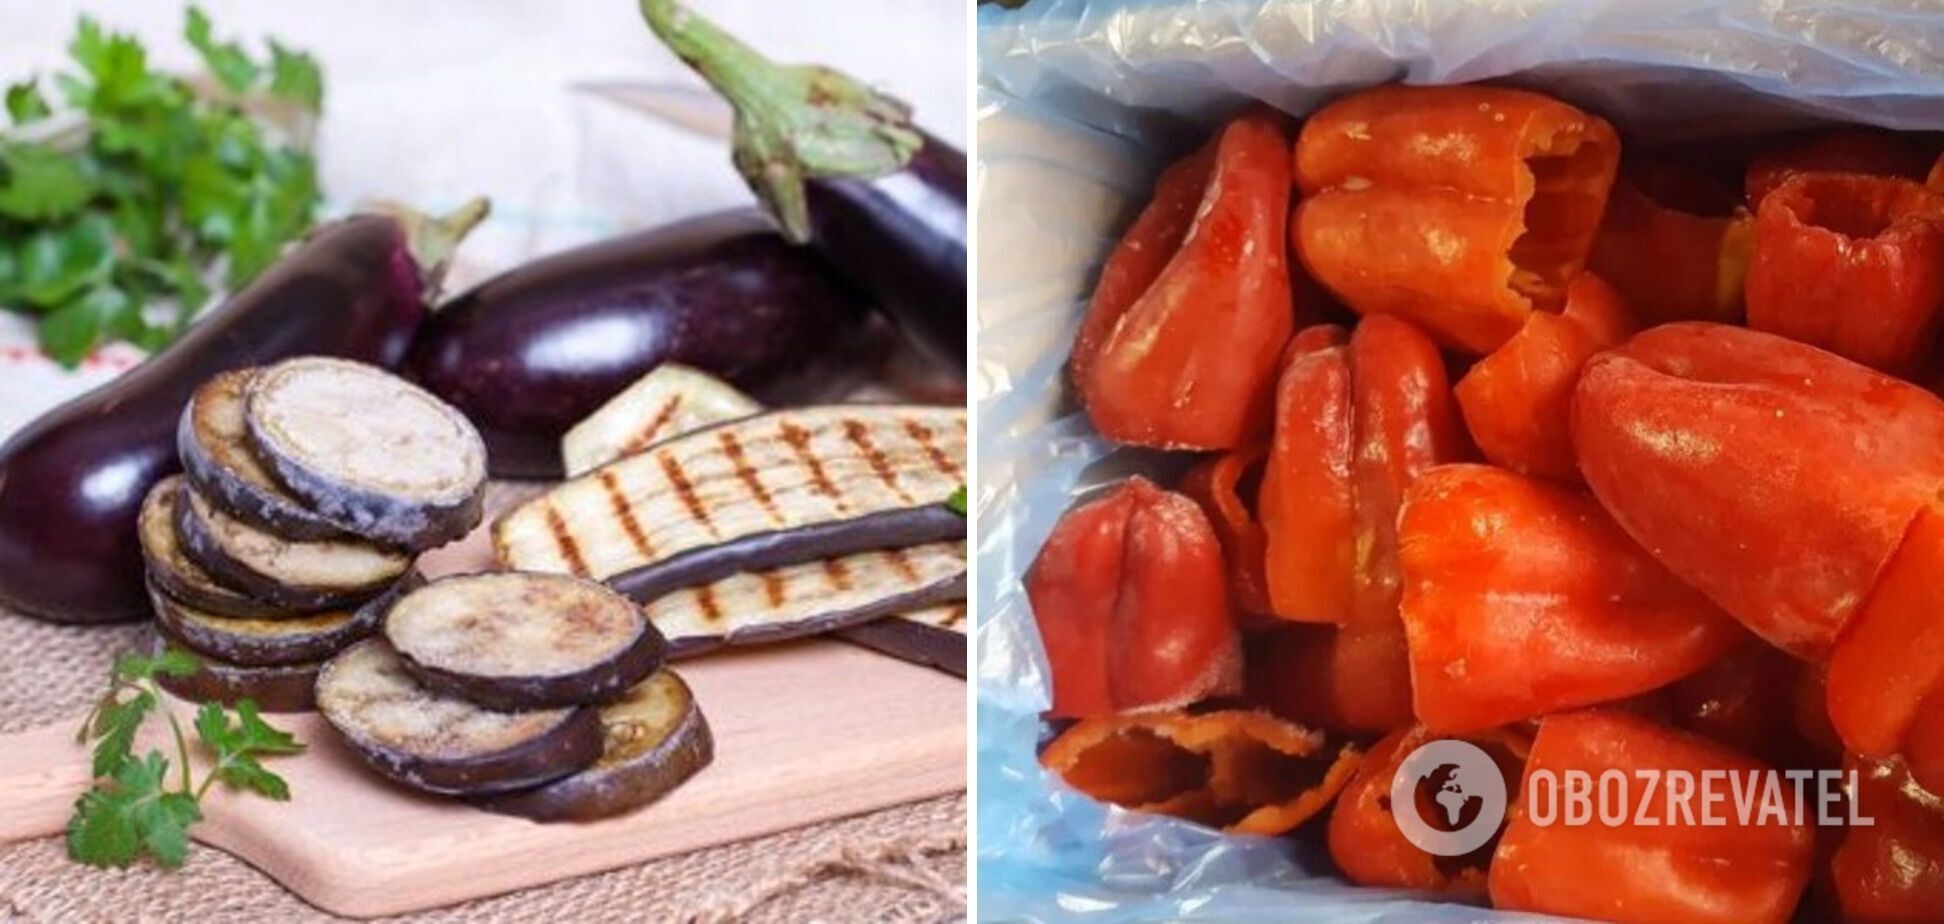 How to freeze peppers and eggplants properly